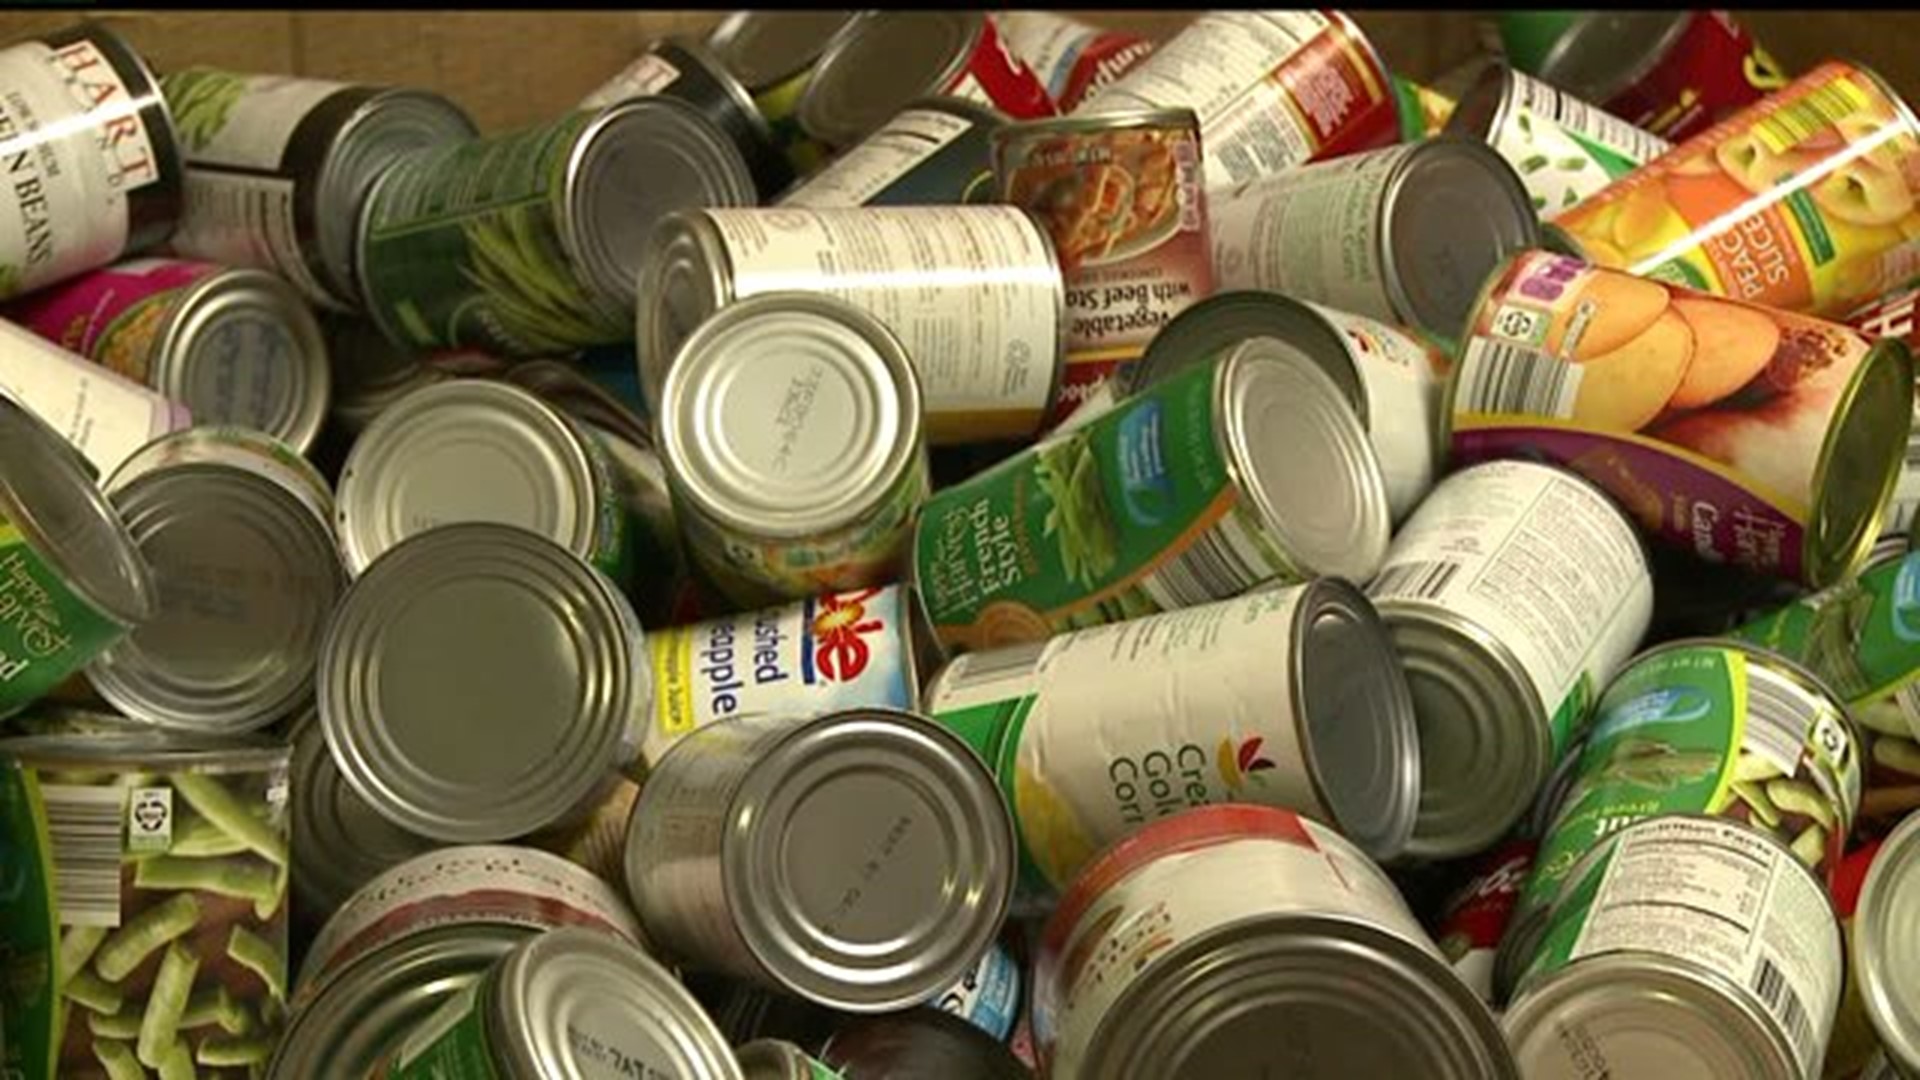 Bethesda Mission prepares for Thanksgiving